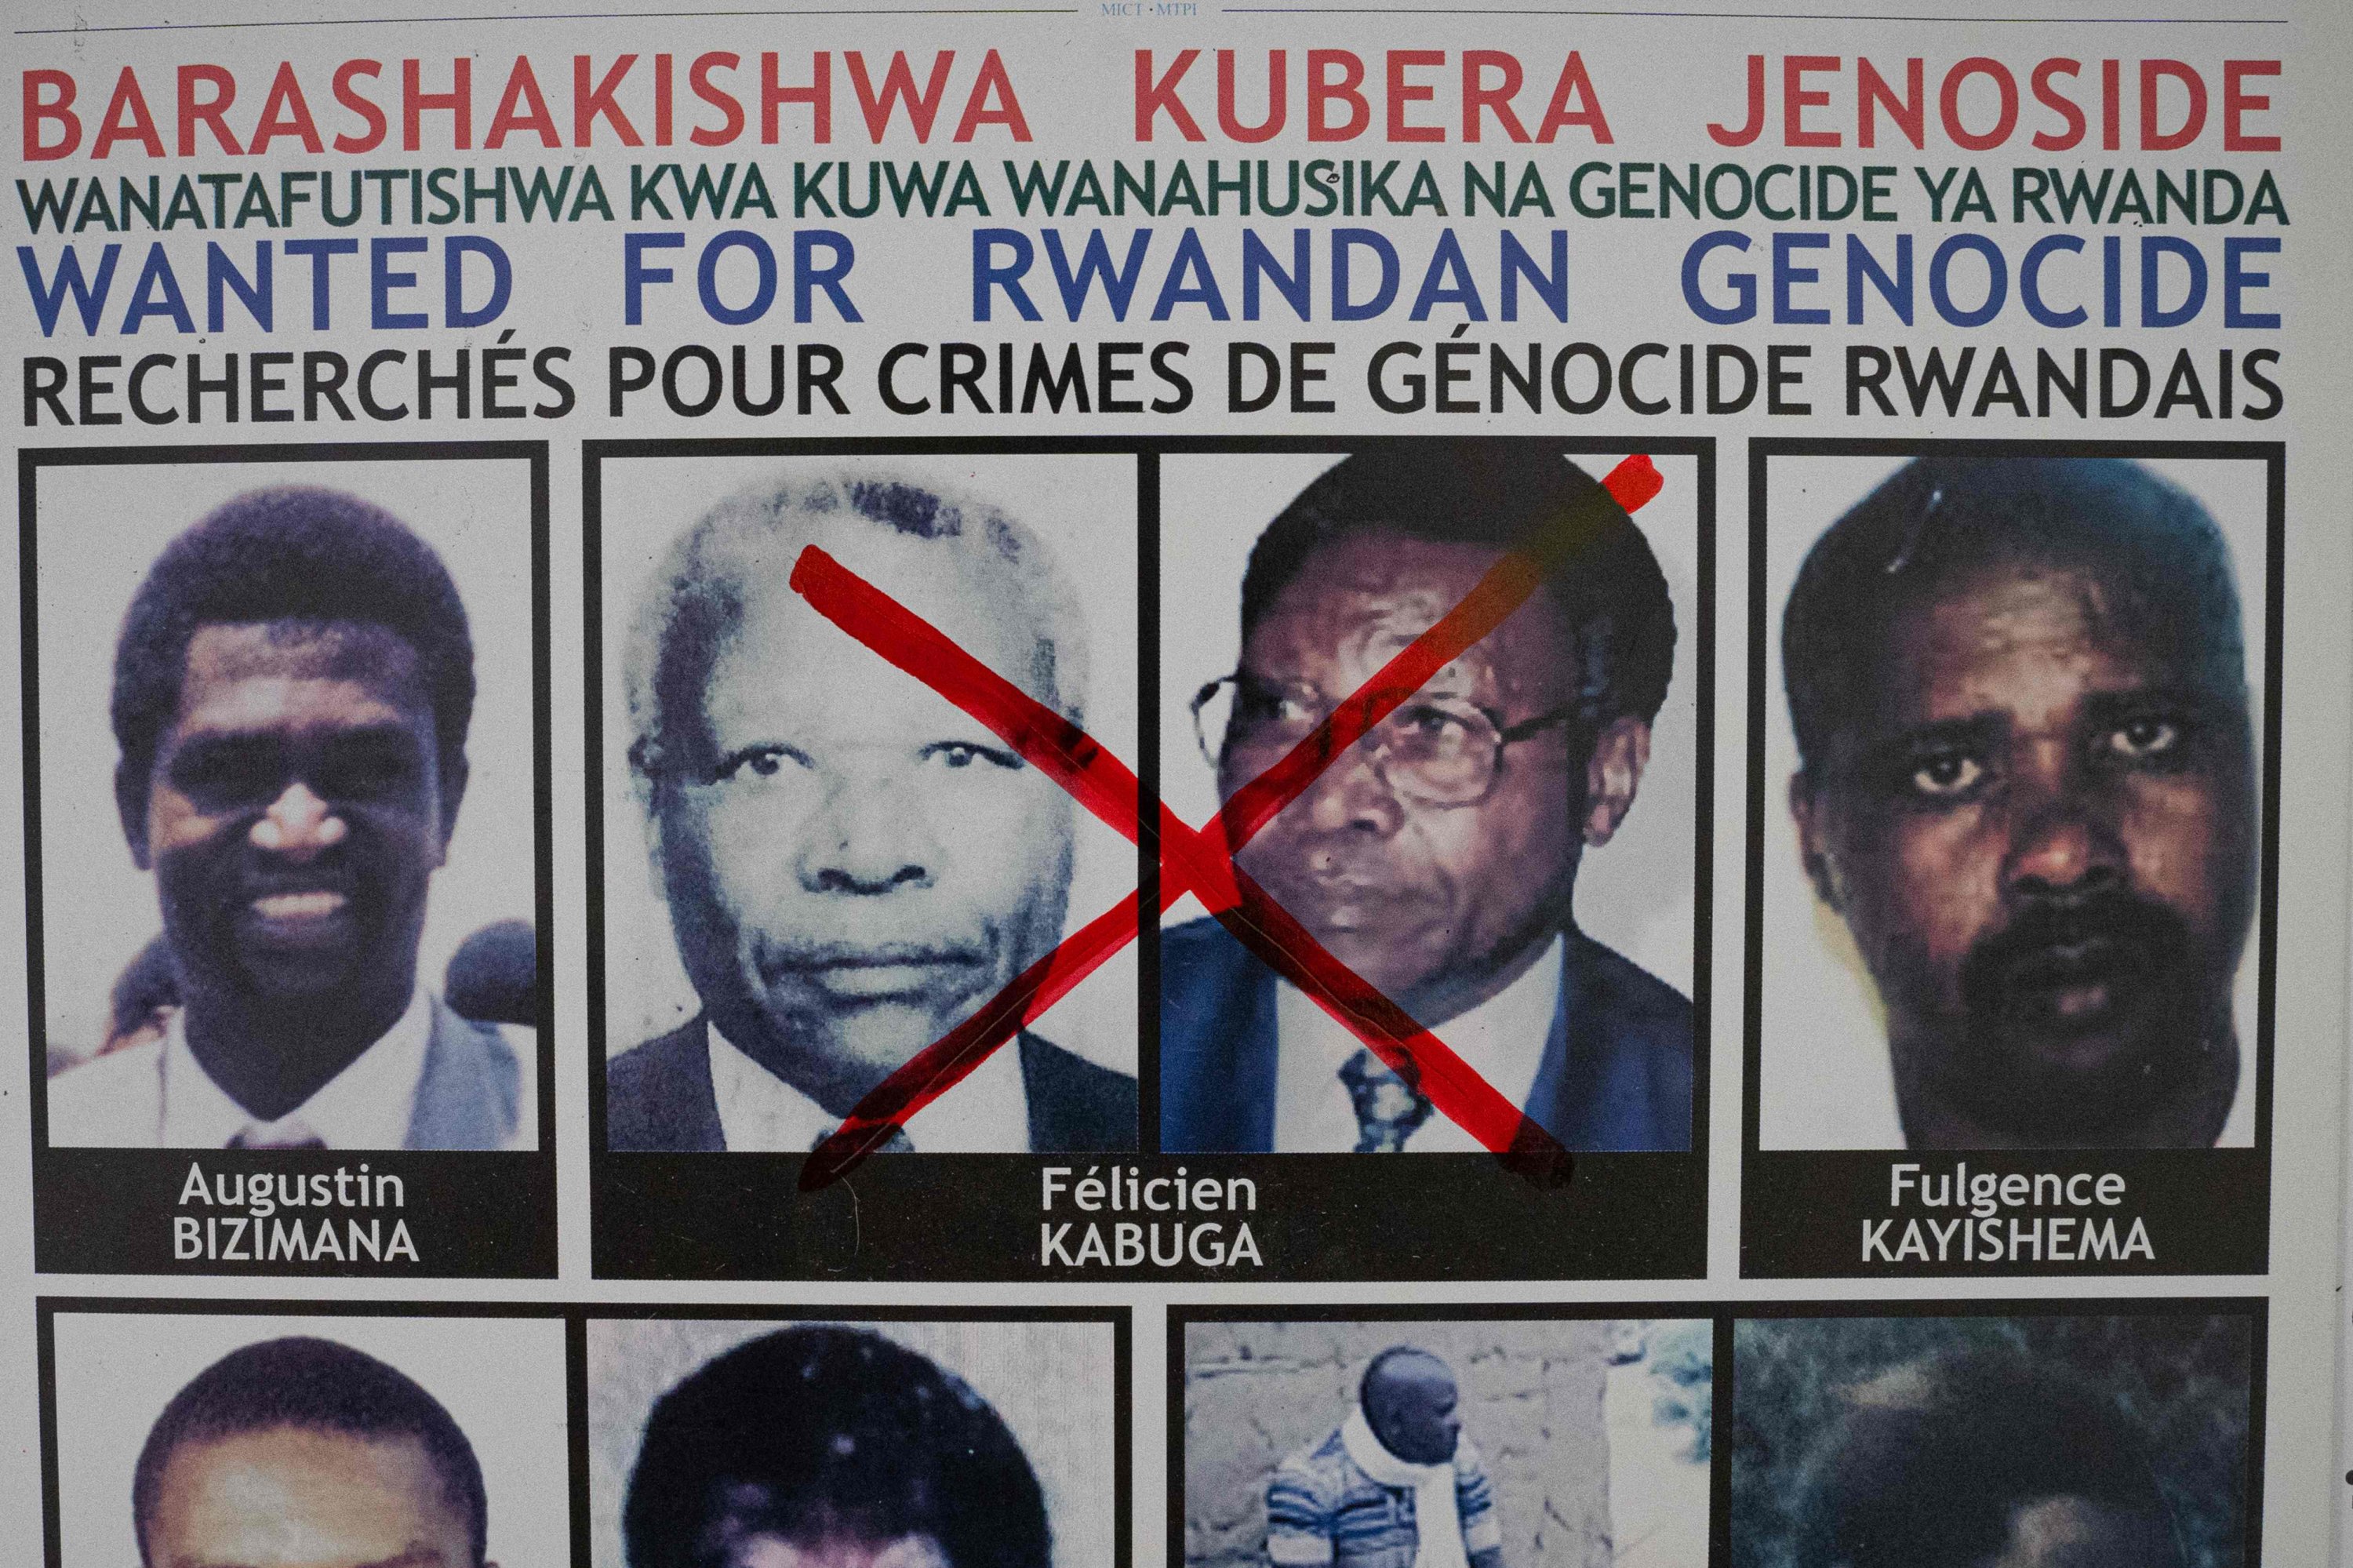 A wanted poster in the Genocide Fugitive Tracking Unit in Kigali, Rwanda. May 2020. Felicien Kabuga is one of the last suspects of 1994 Rwanda genocide. Source: Daily Sabah ~